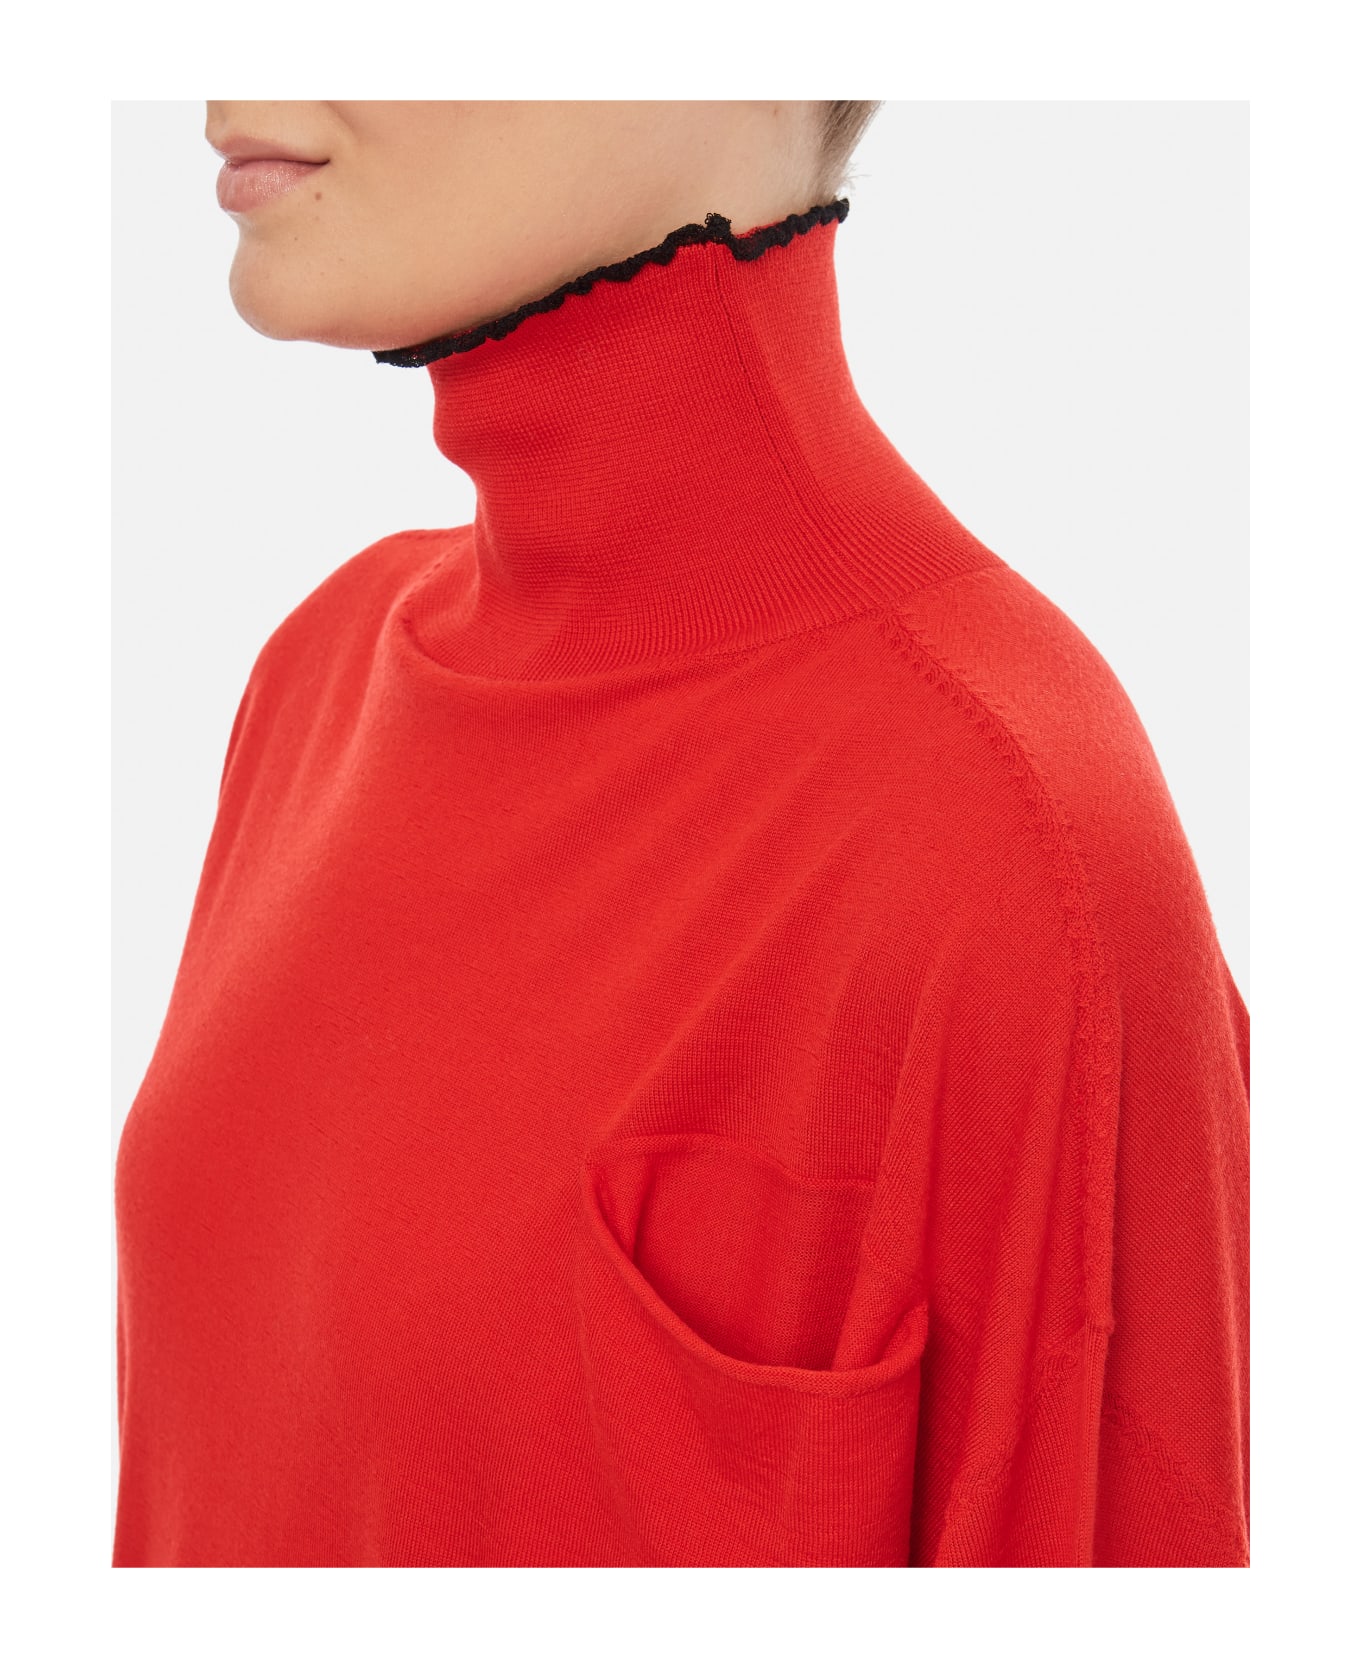 Quira Rollneck Wool Sweater - Red